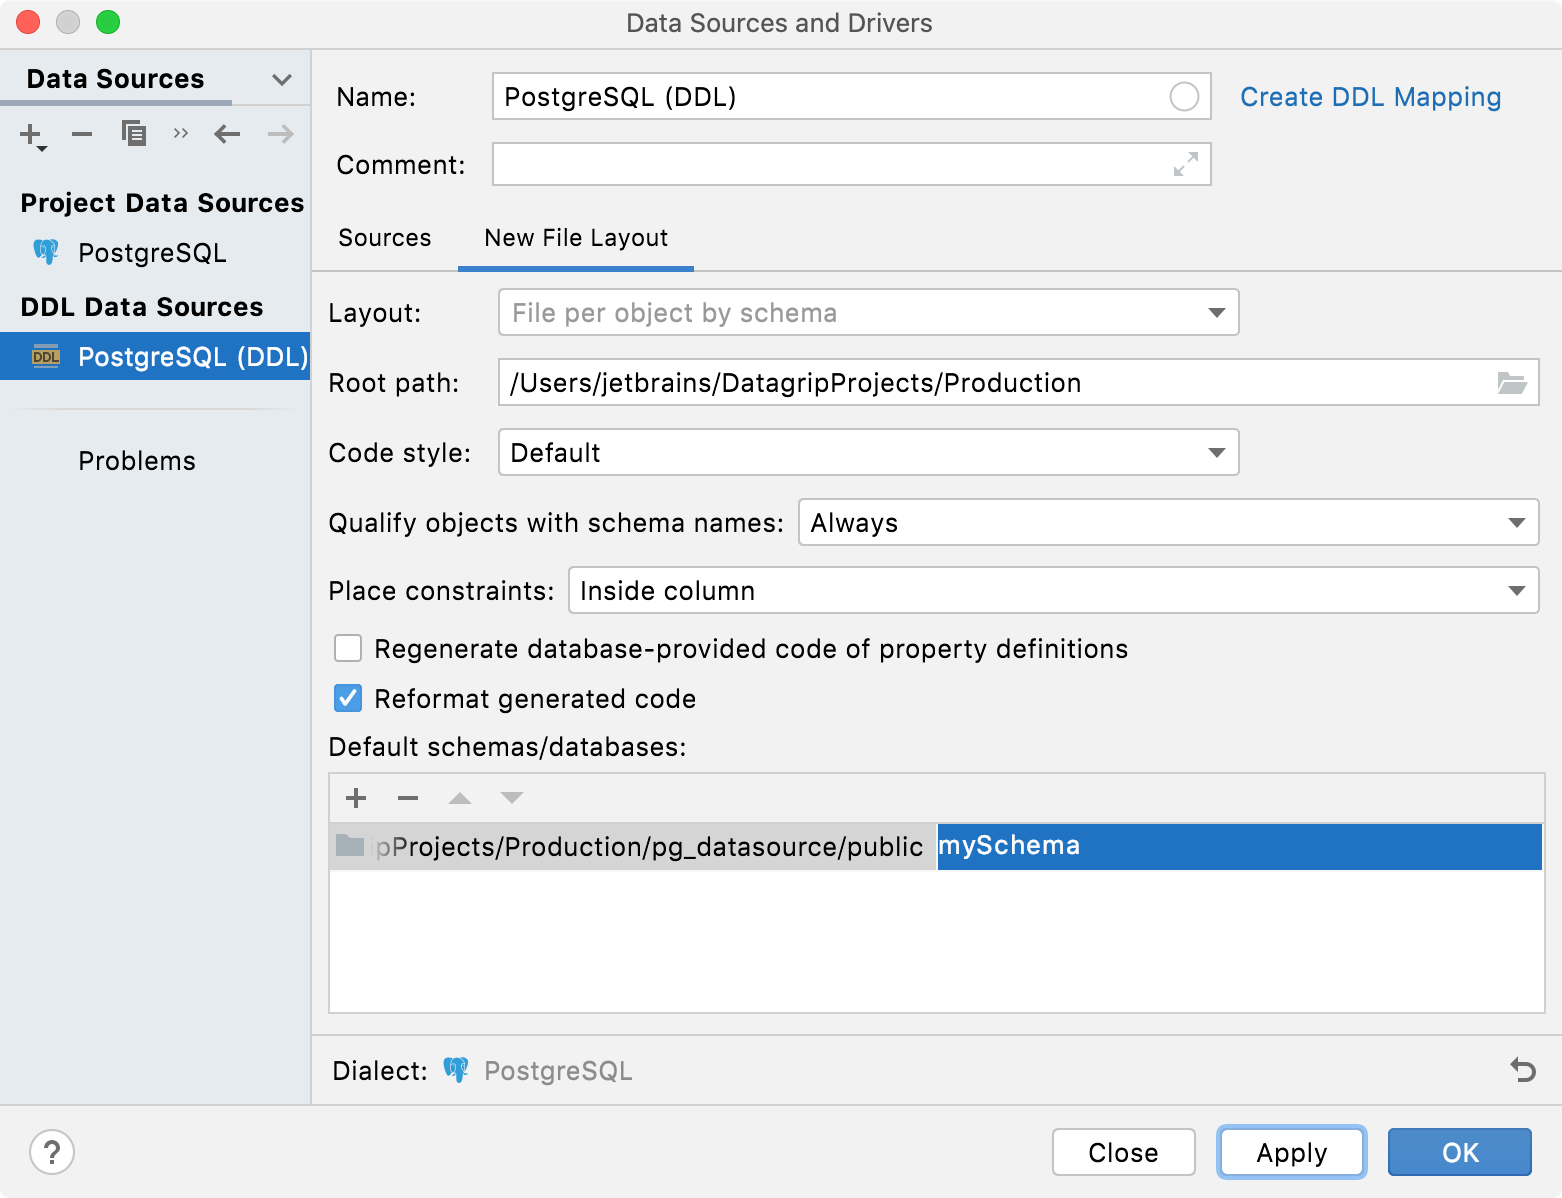 Configuring DDL generation settings